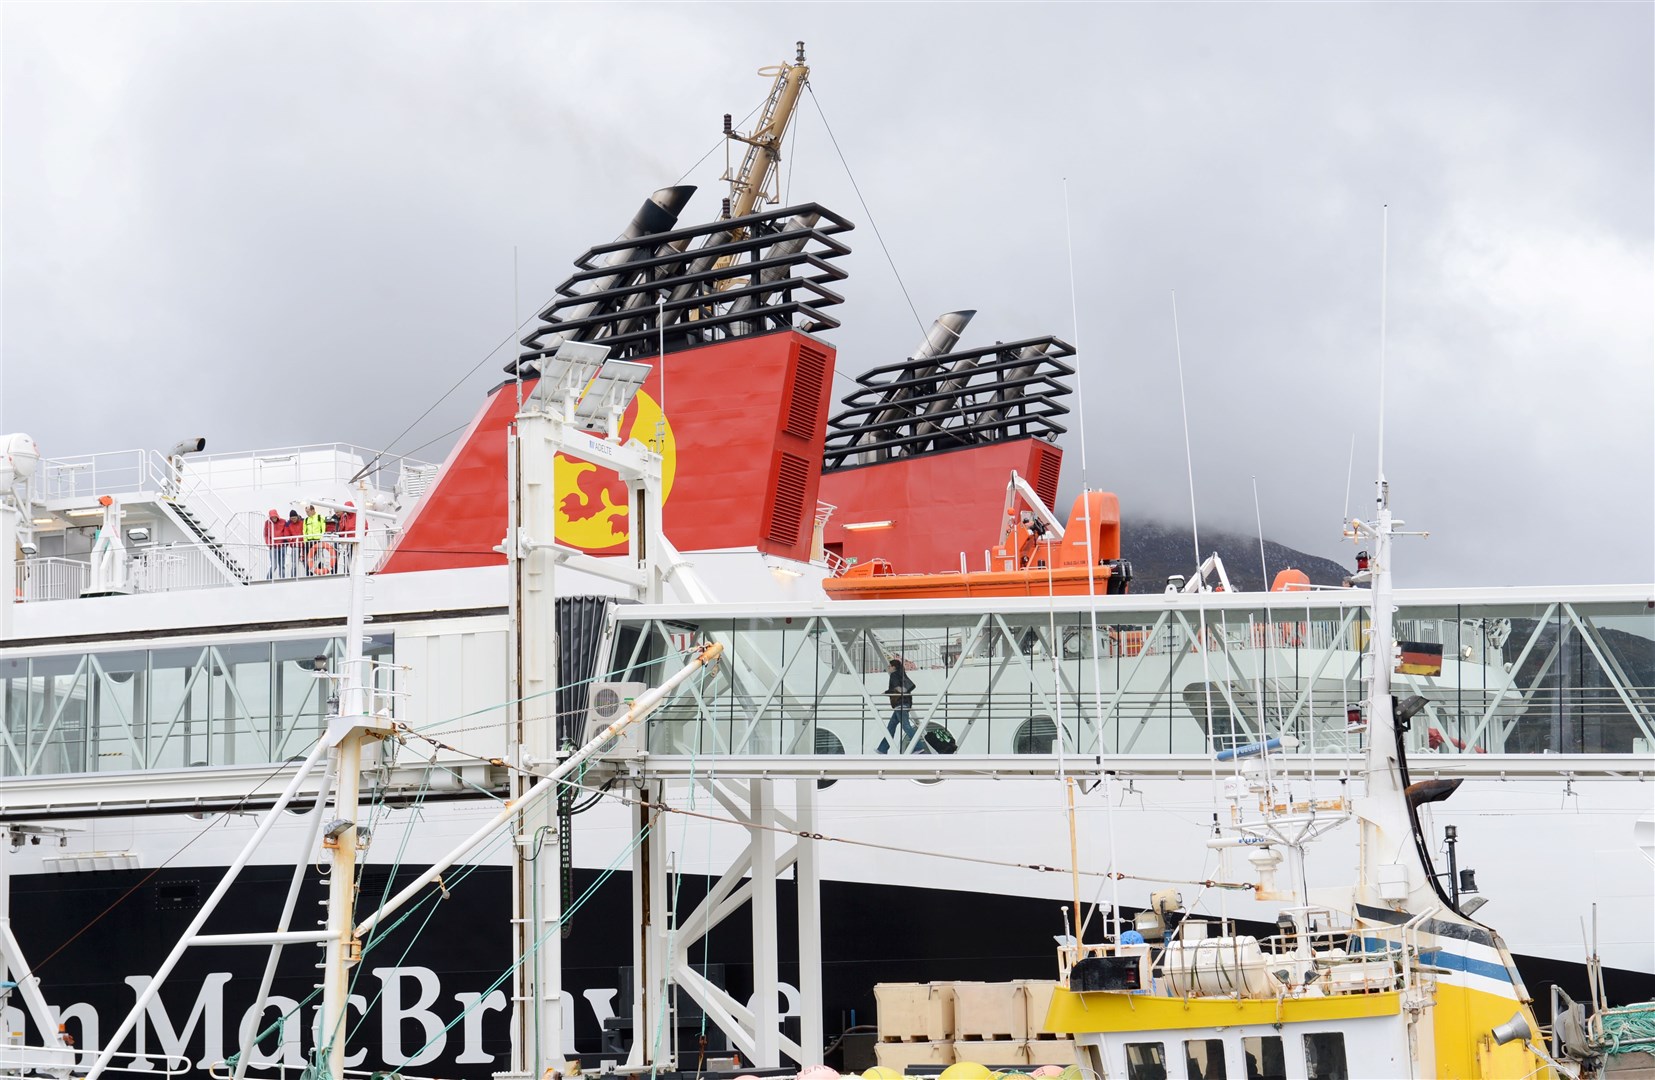 CalMac ferry sailings have been disrupted.